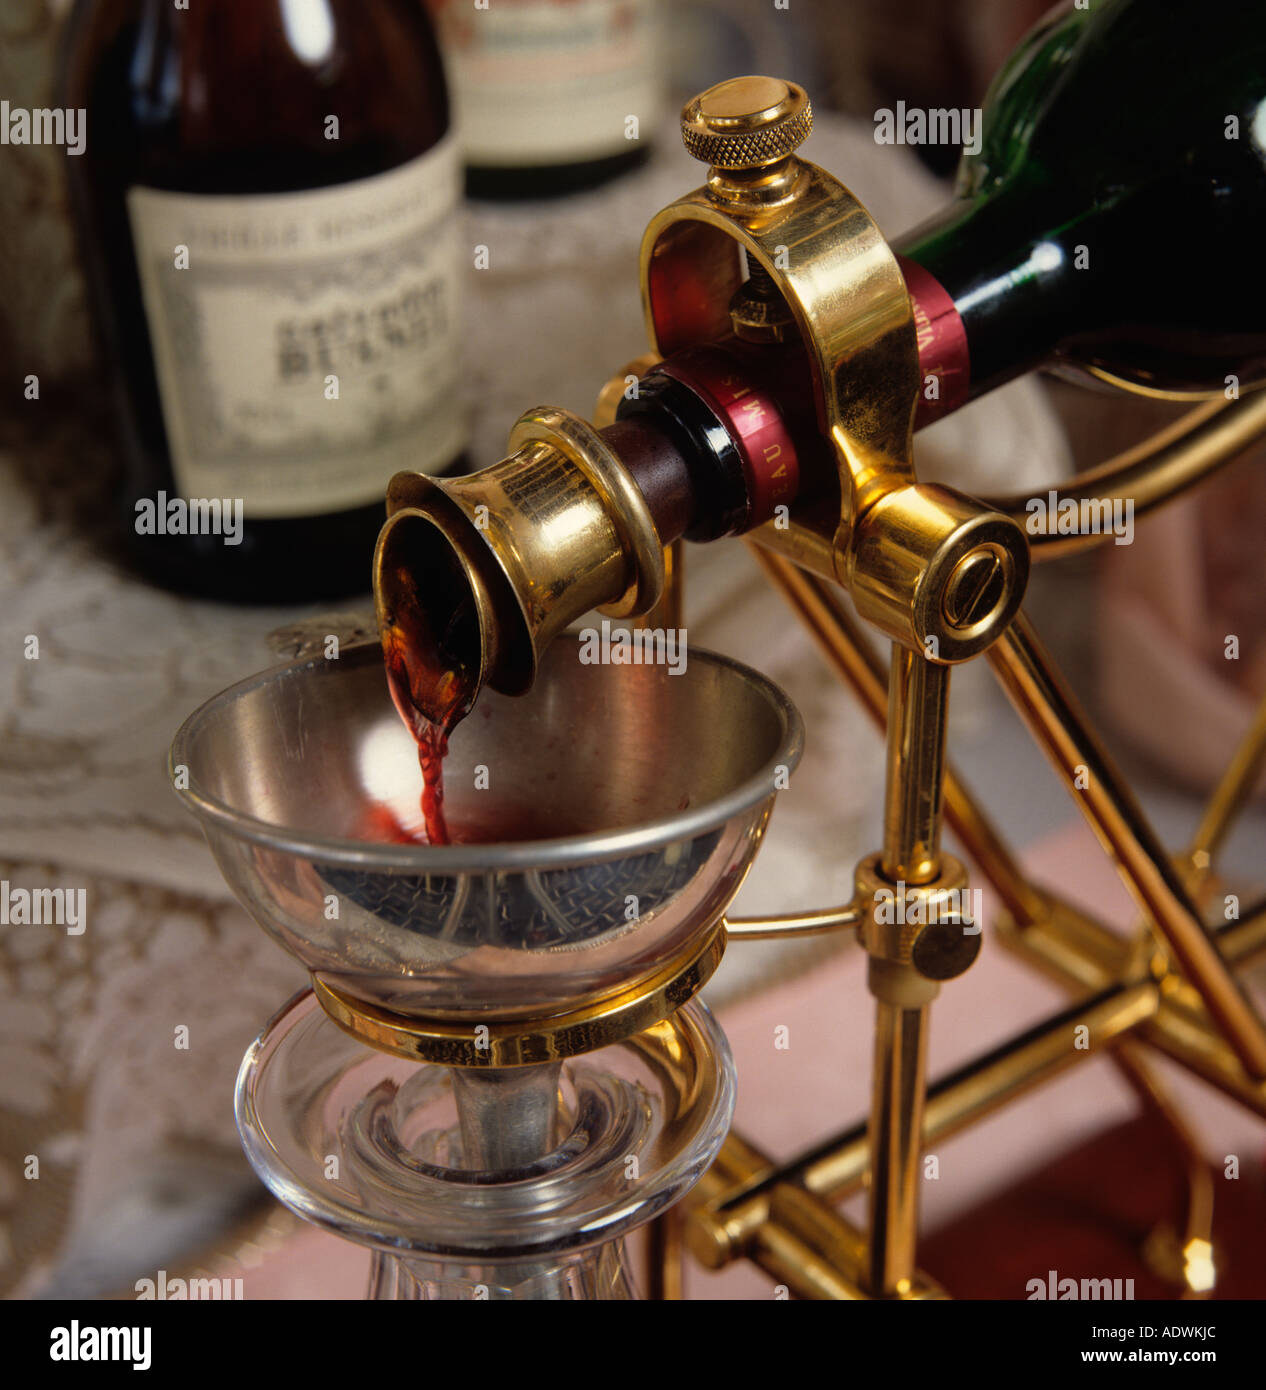 Food drink decanting fine wine to remove sediment Stock Photo